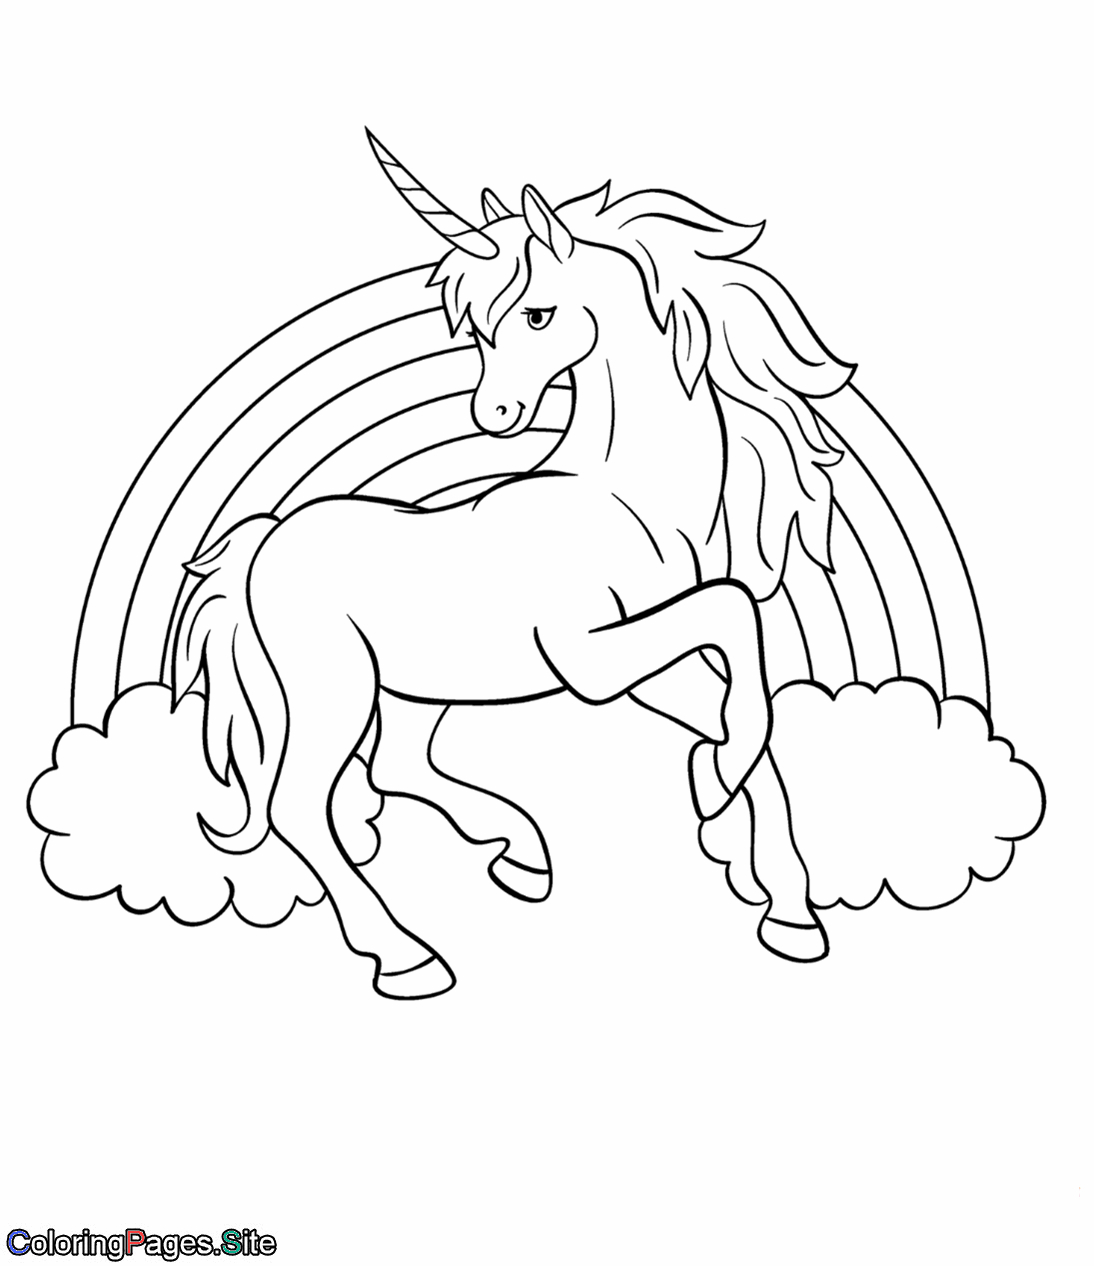 Unicorno Coloring Pages Coloring Pages Unicorn Coloring Pages For Kids Printable Free